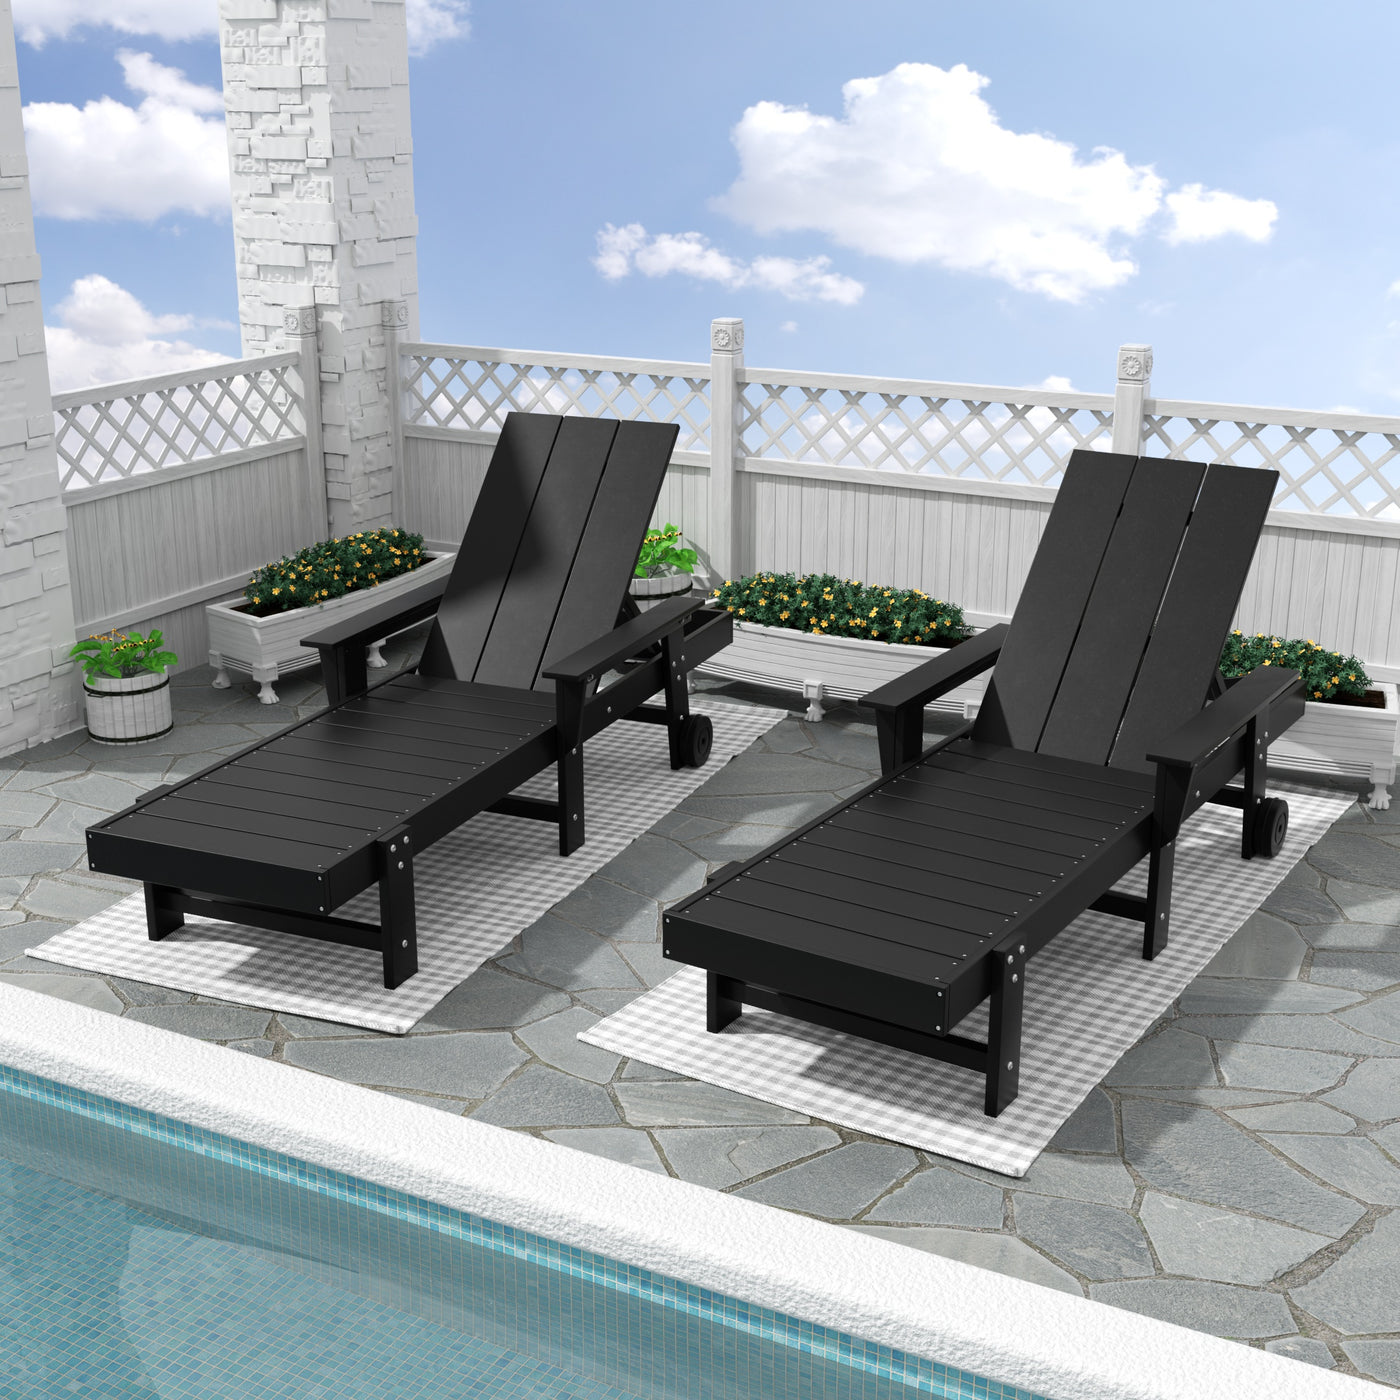 Ashore 2 Piece Reclining Chaise Lounge With Arms & Wheels